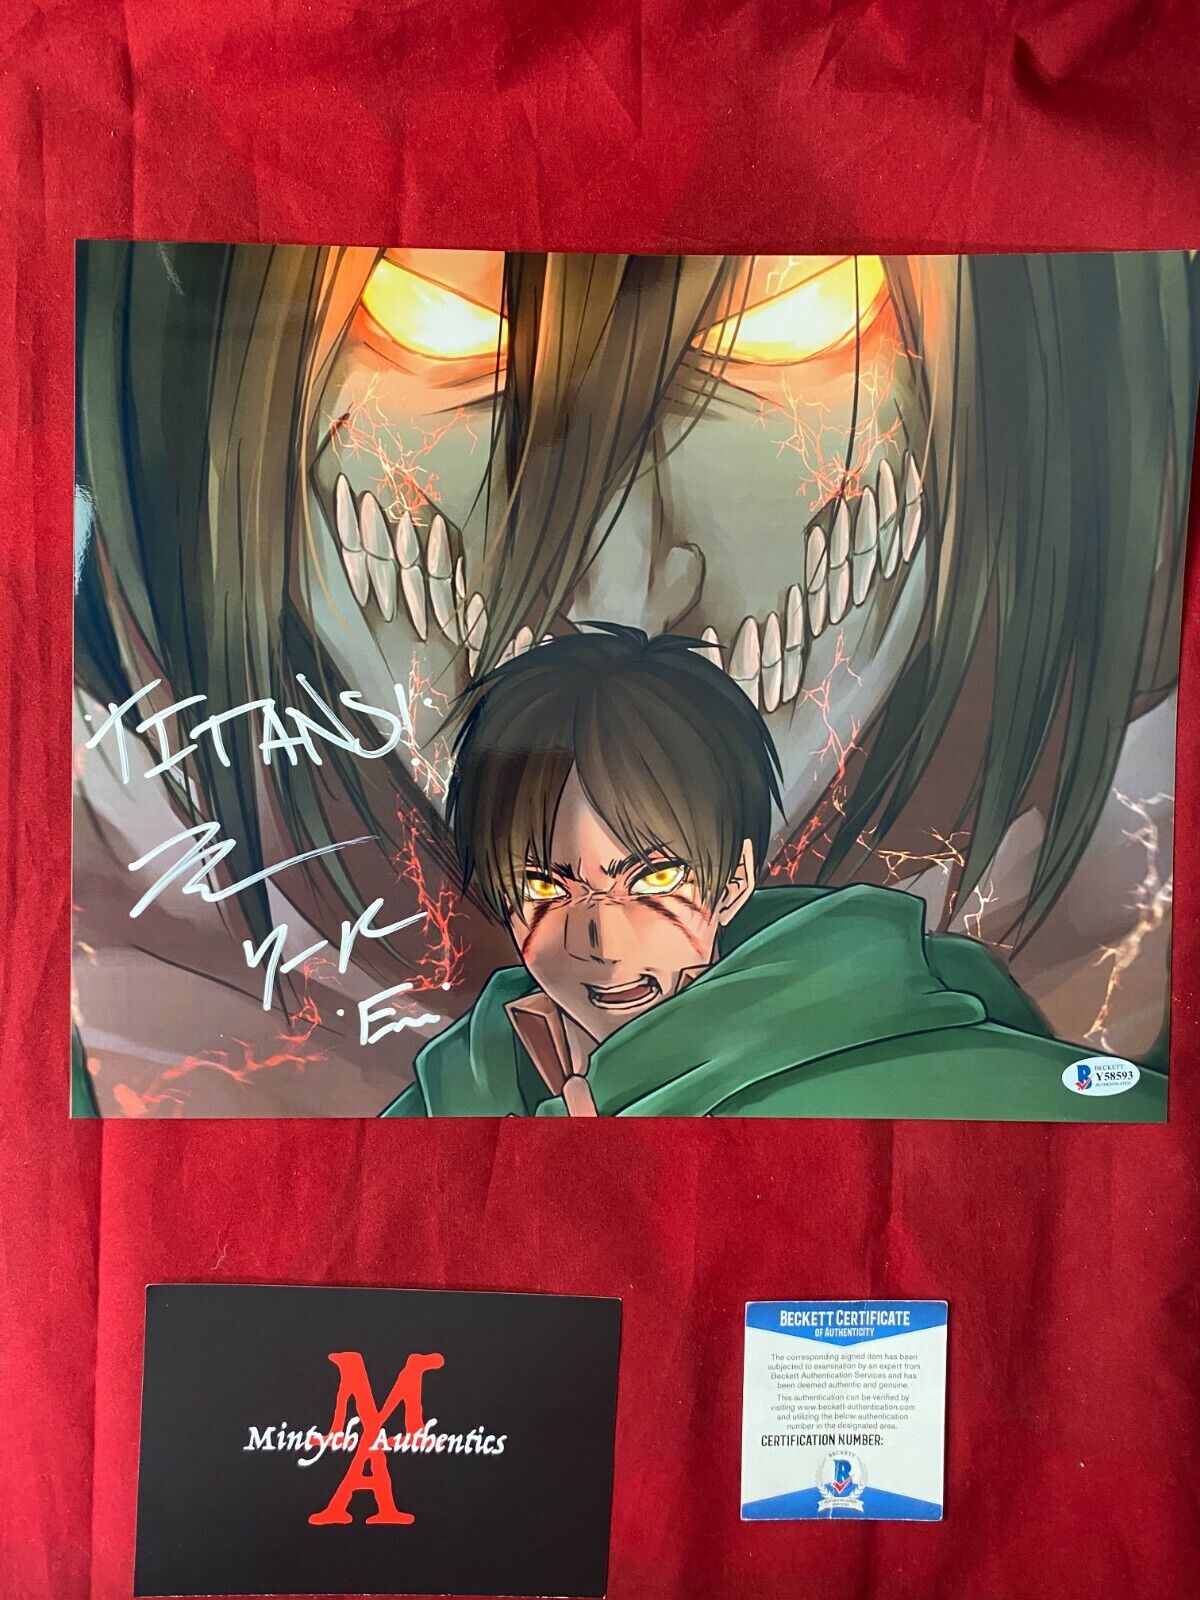 BRYCE PAPENBROOK SIGNED 11x14 Photo Poster painting! ATTACK ON TITAN! EREN! BECKETT COA! ANIME!